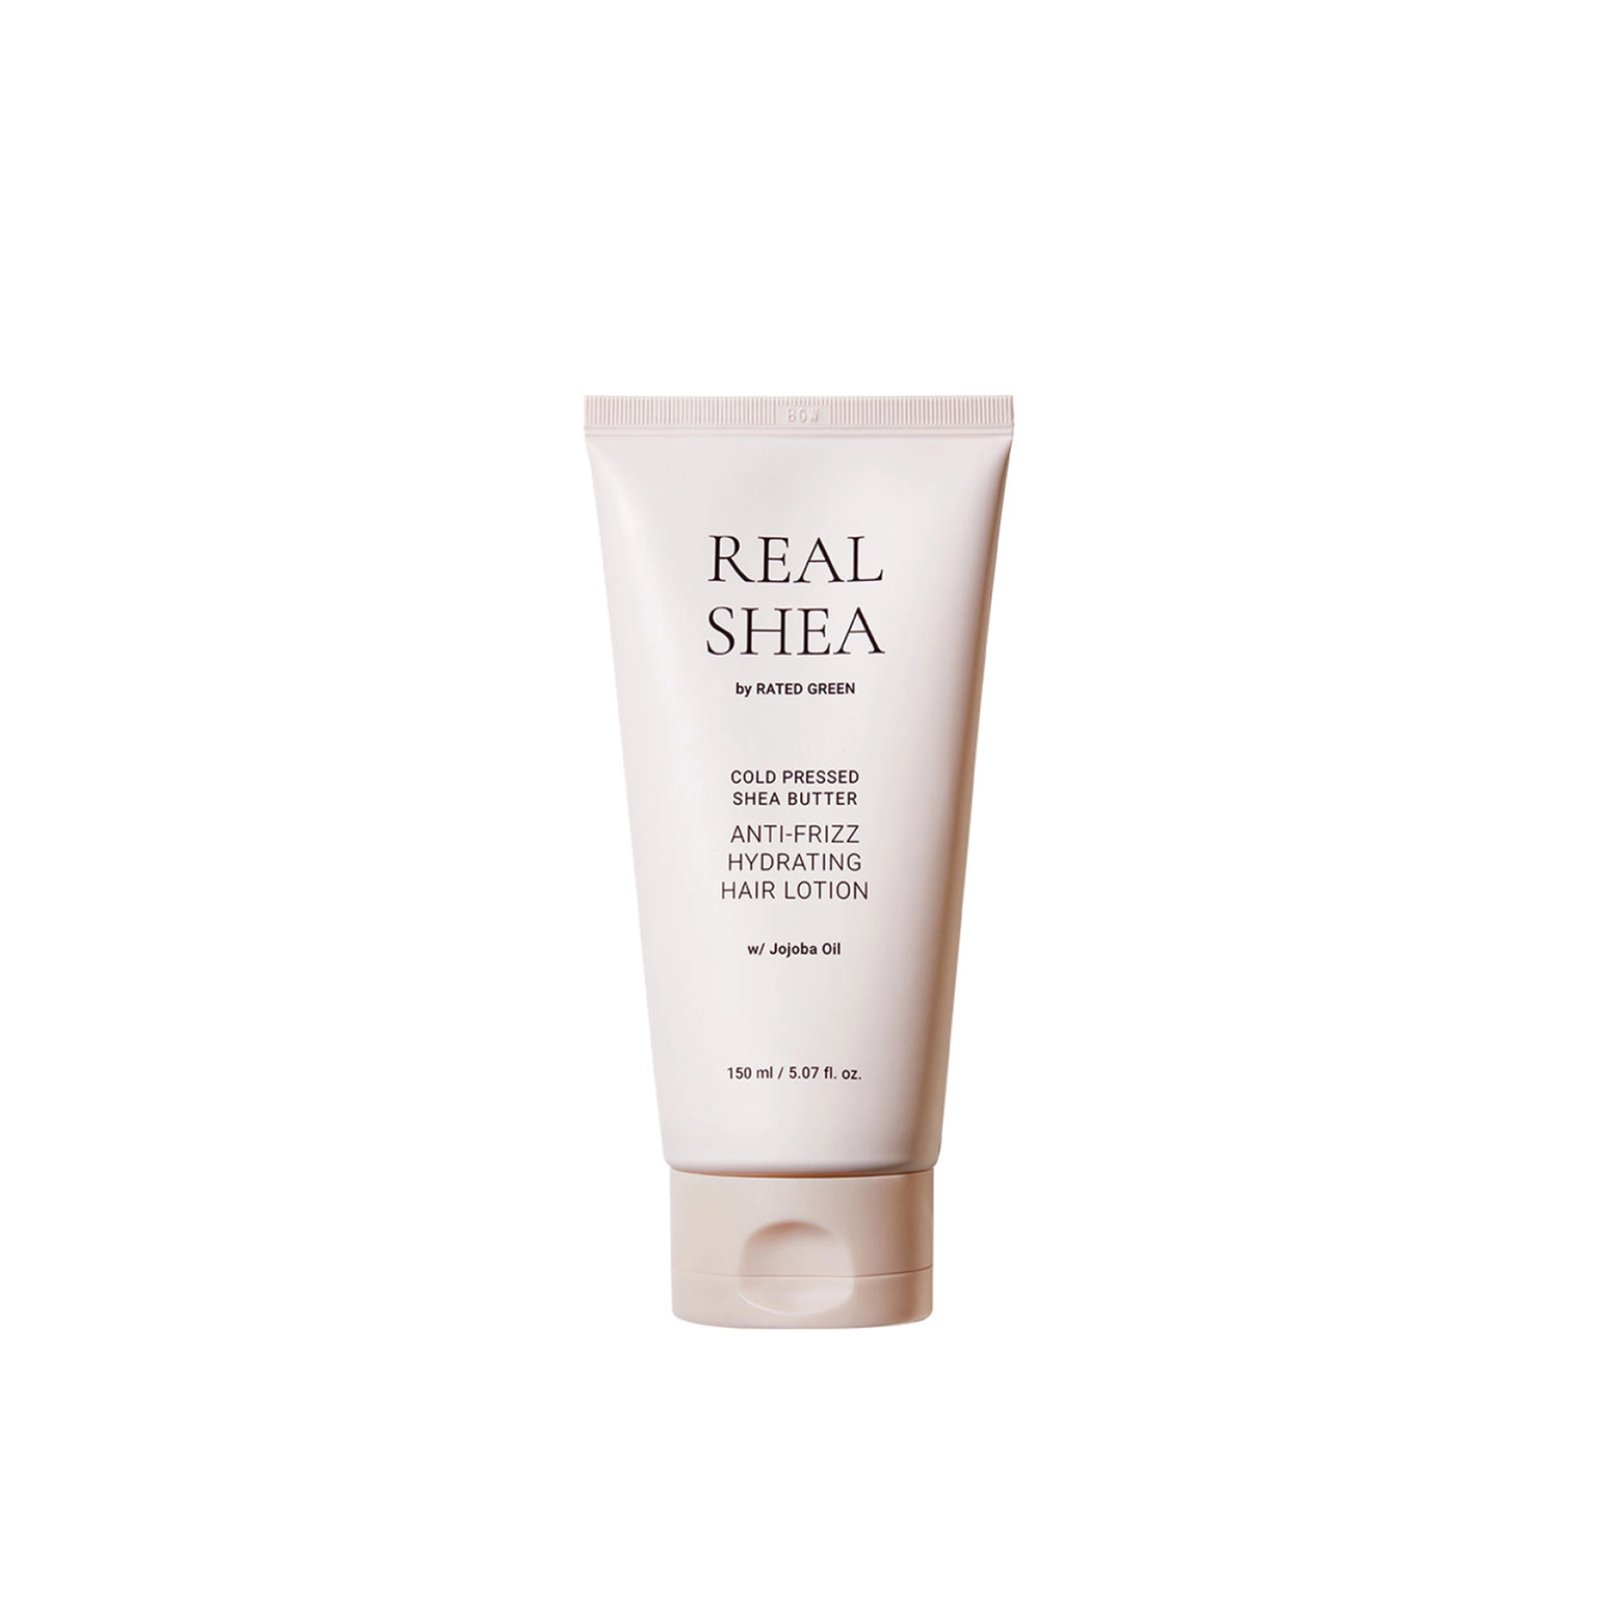 Rated Green Real Shea Anti-Frizz Hydrating Hair Lotion 150ml